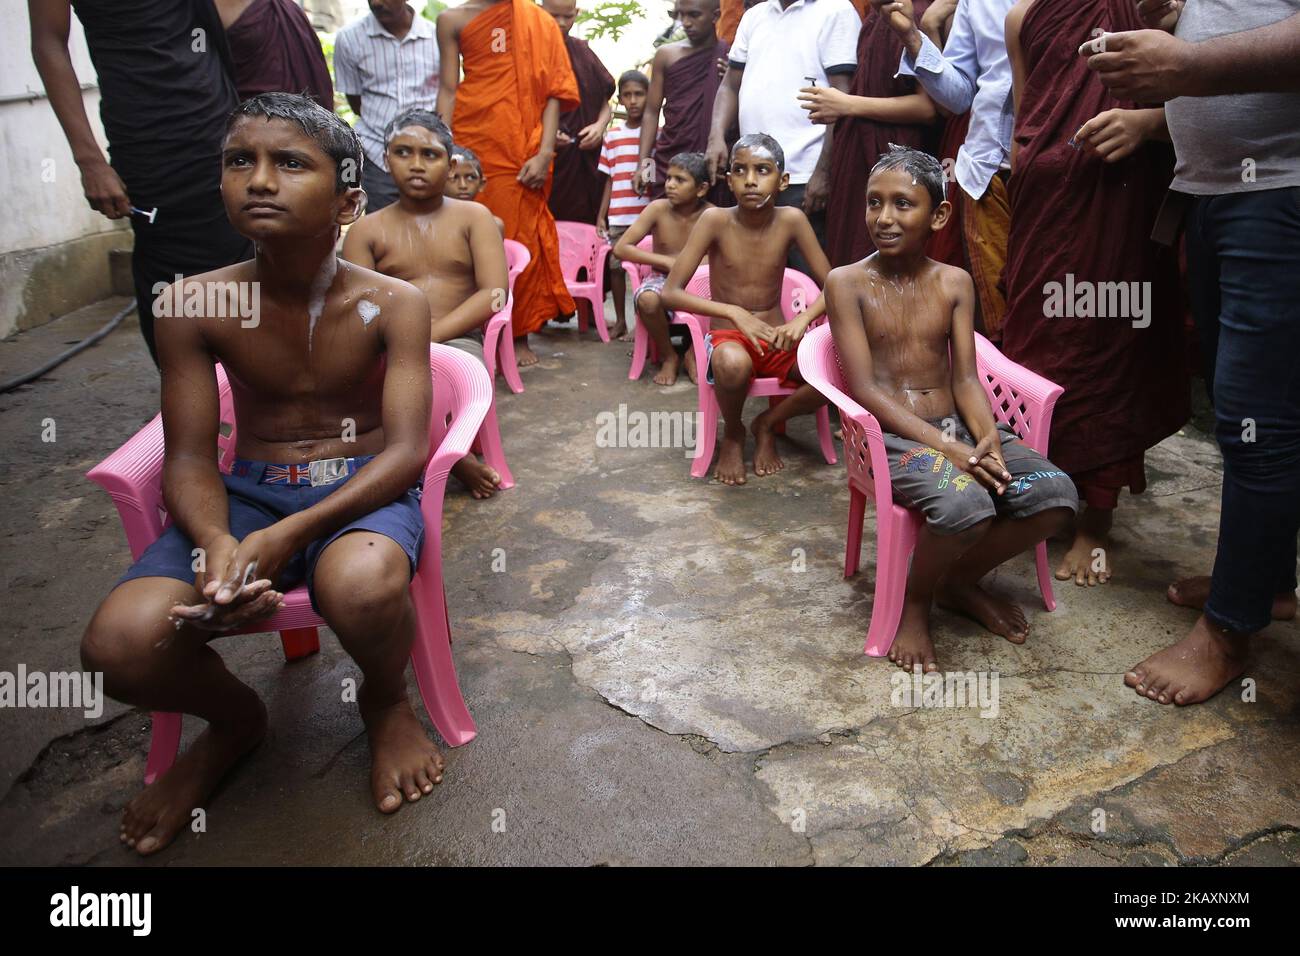 Sri Lankan boys await to get their heads shaved by Sri Lankan Buddhist monks during a ceremony to be ordained as novice Buddhist monks (samanera) in Colombo, Sri Lanka on Sunday 29 April 2018 which also marks the Vesak full moon poya day Celebrated by Buddhists to mark three momentous events in Lord Buddha's life – his birth, enlightenment, and his departure from the human world. (Photo by Tharaka Basnayaka/NurPhoto) Stock Photo